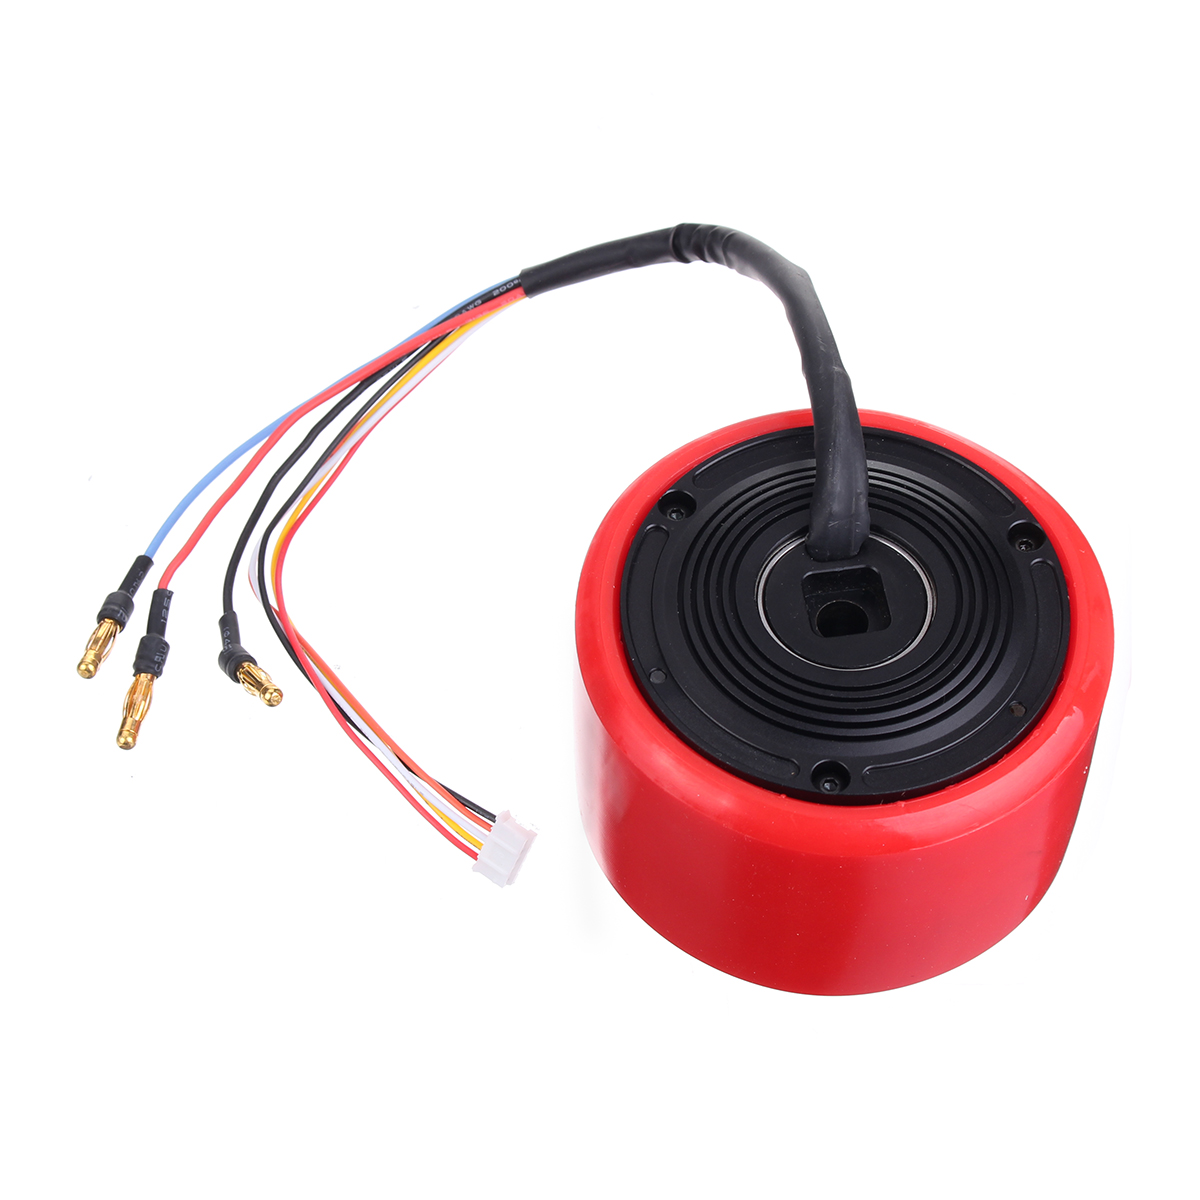 

260W 25000RPM Brushless Motor For DIY Electric Skateboard Scooter Multicopter